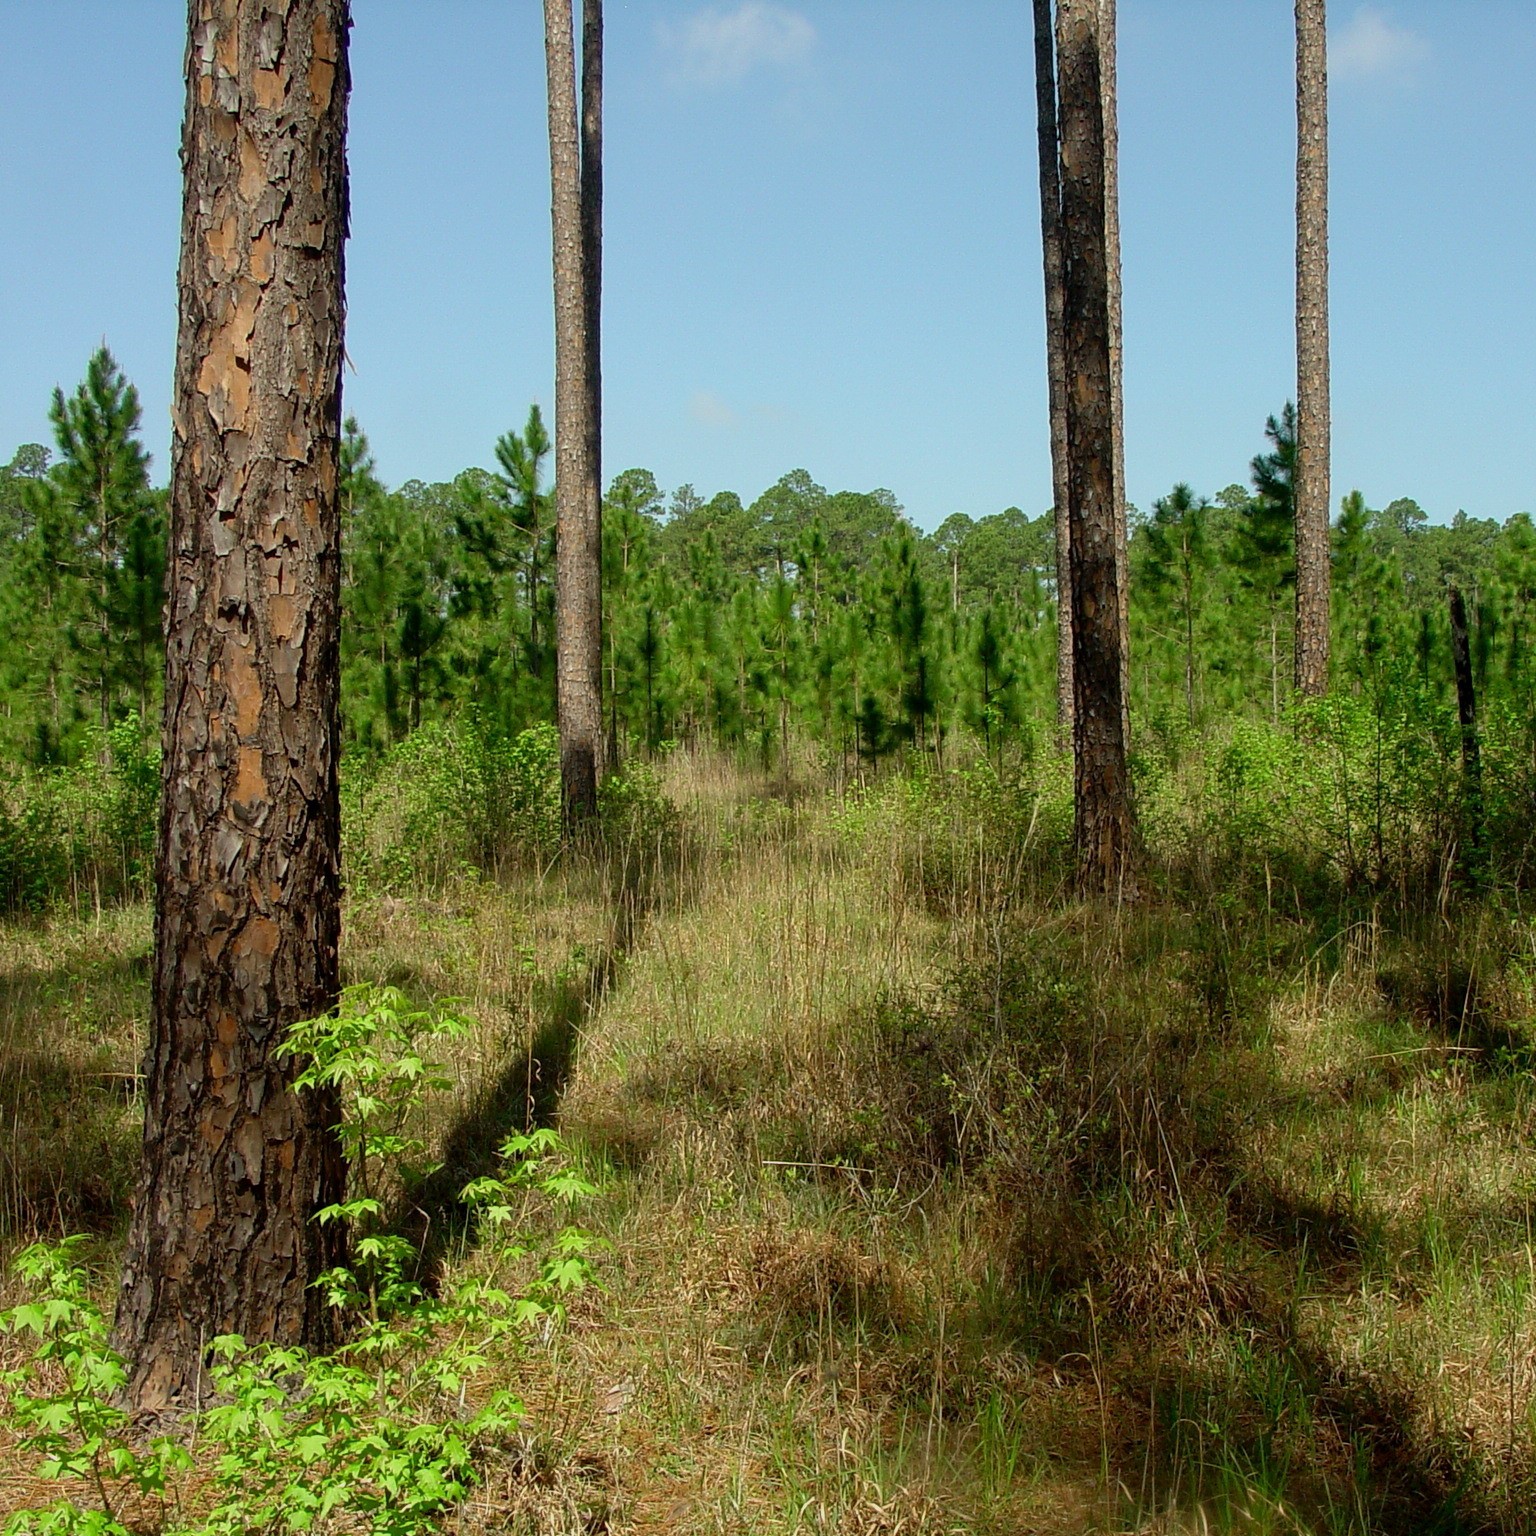 Texas A&M Forest Service and the Texas Longleaf Team have funding available through the Texas Longleaf Conservation Assistance Program for landowners interested in restoring and enhancing longleaf pine ecosystems on their property.